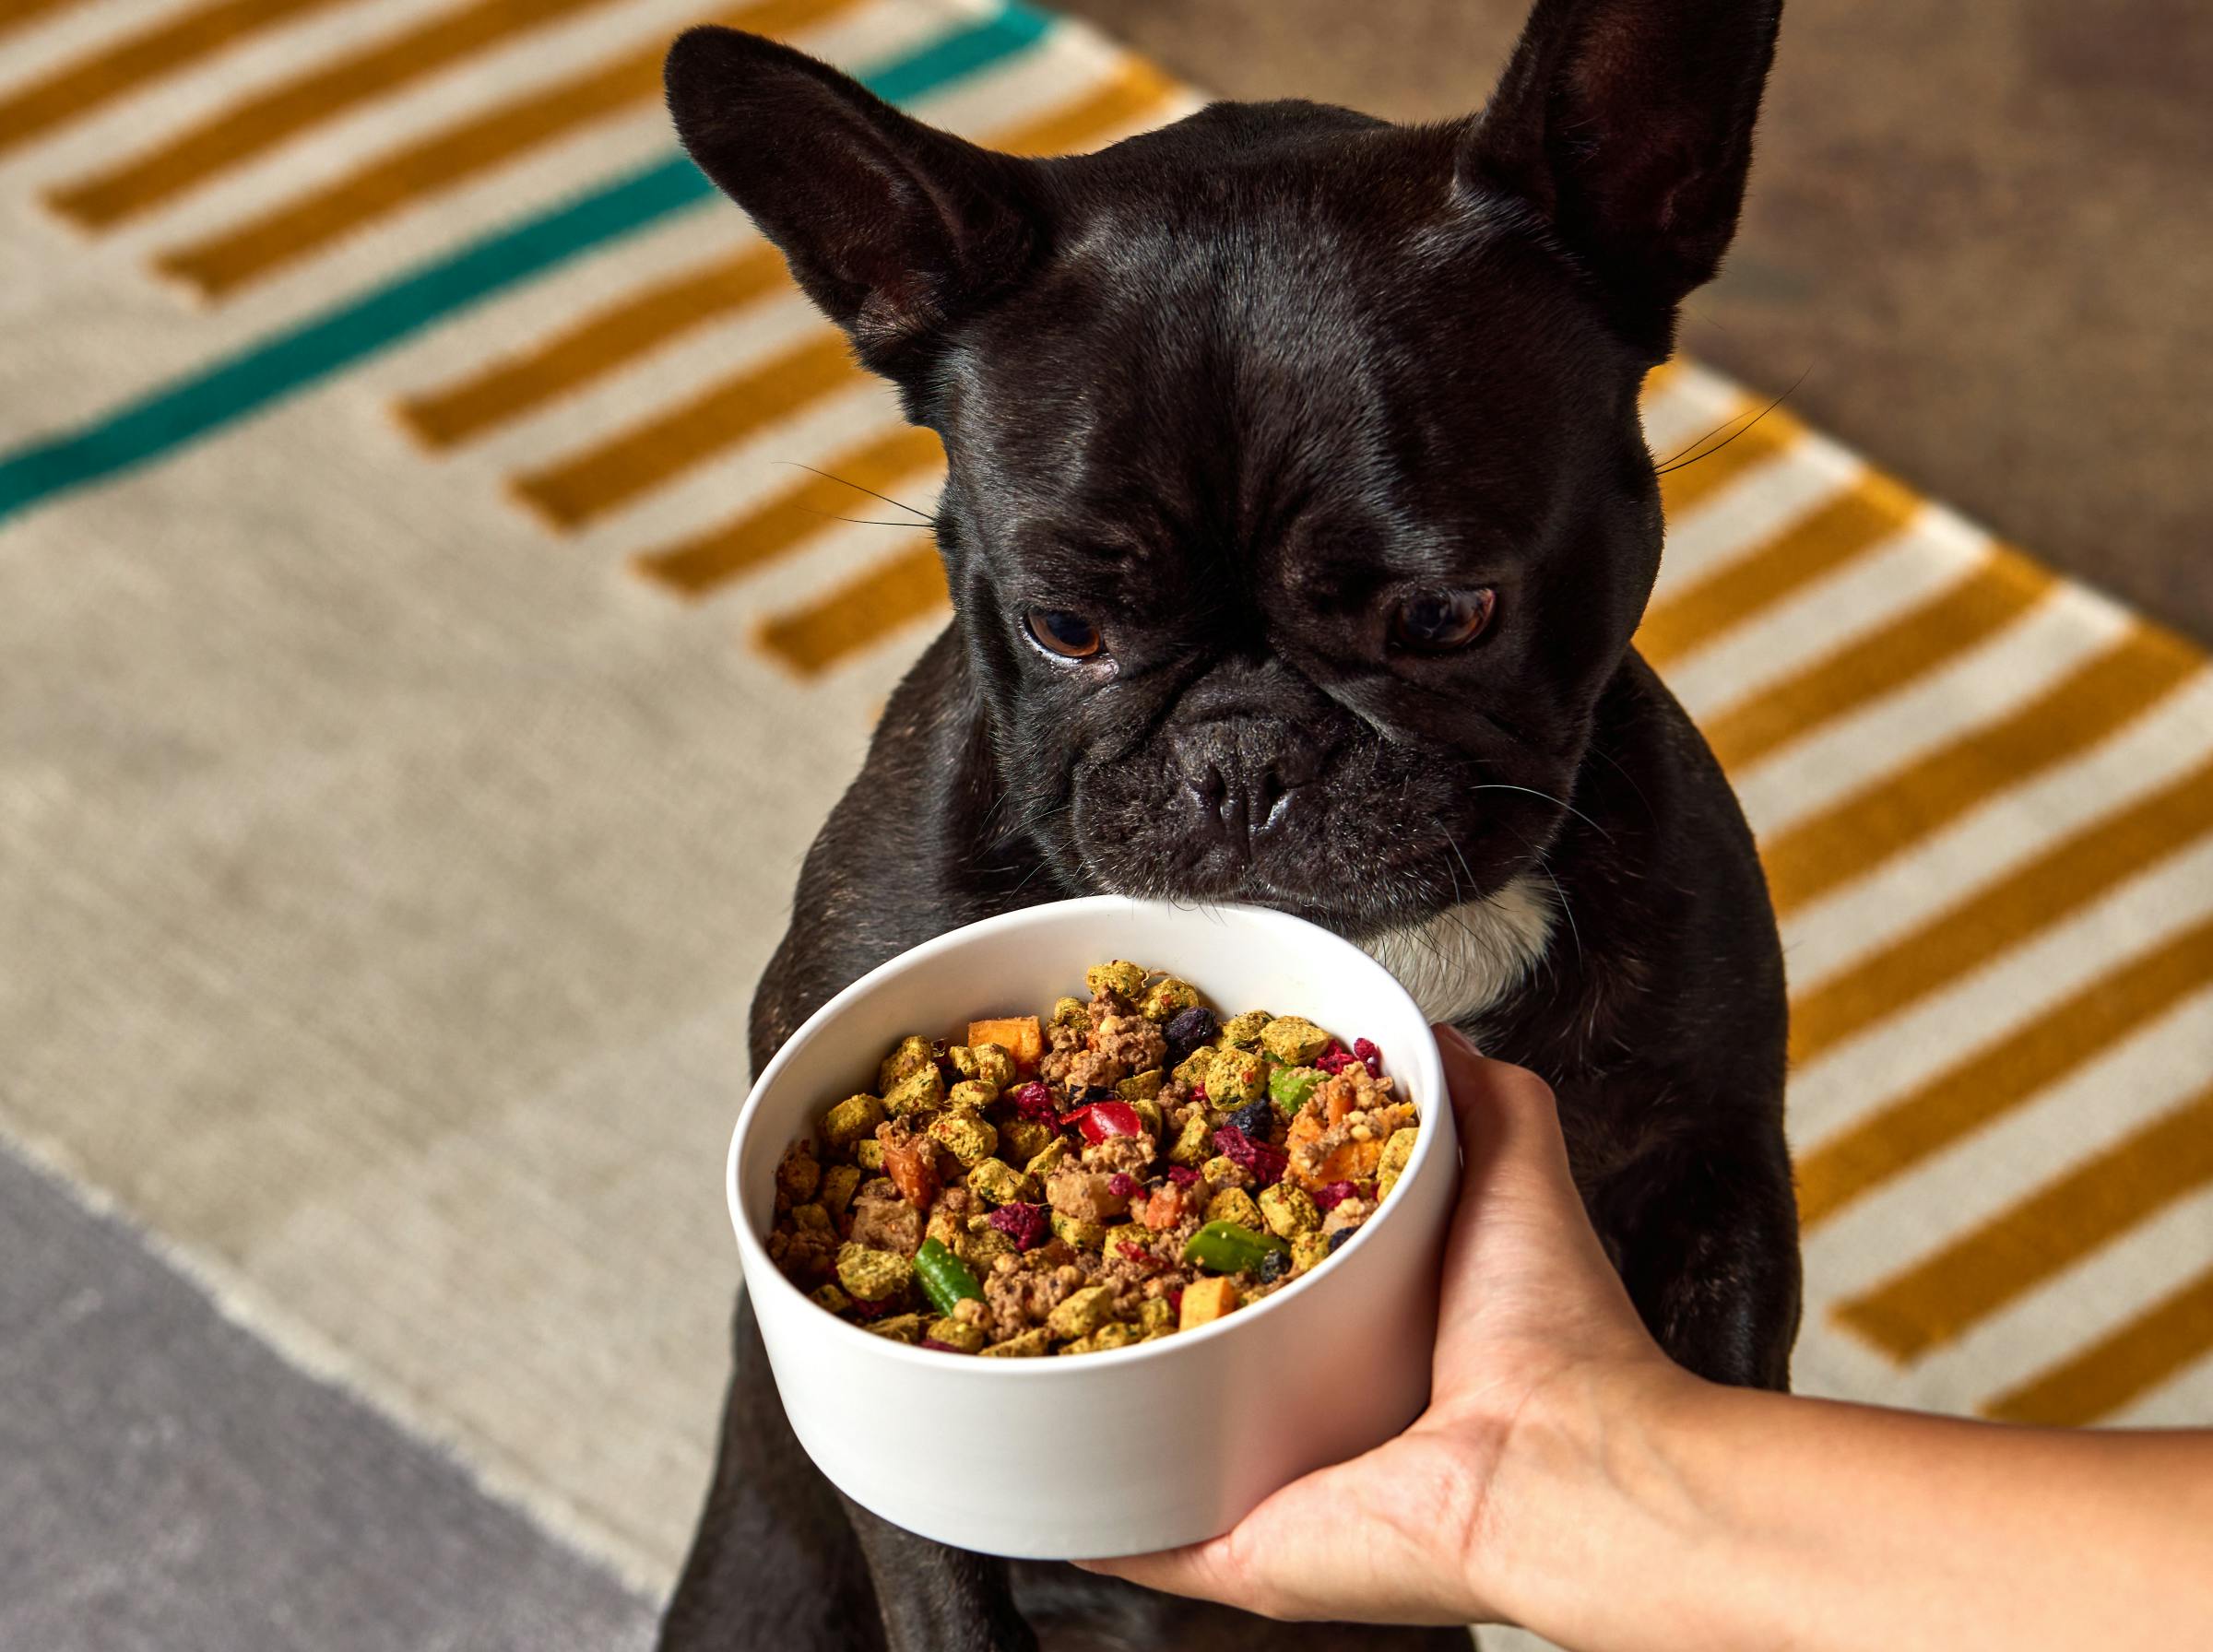 Pug looking at bowl of food with various colors